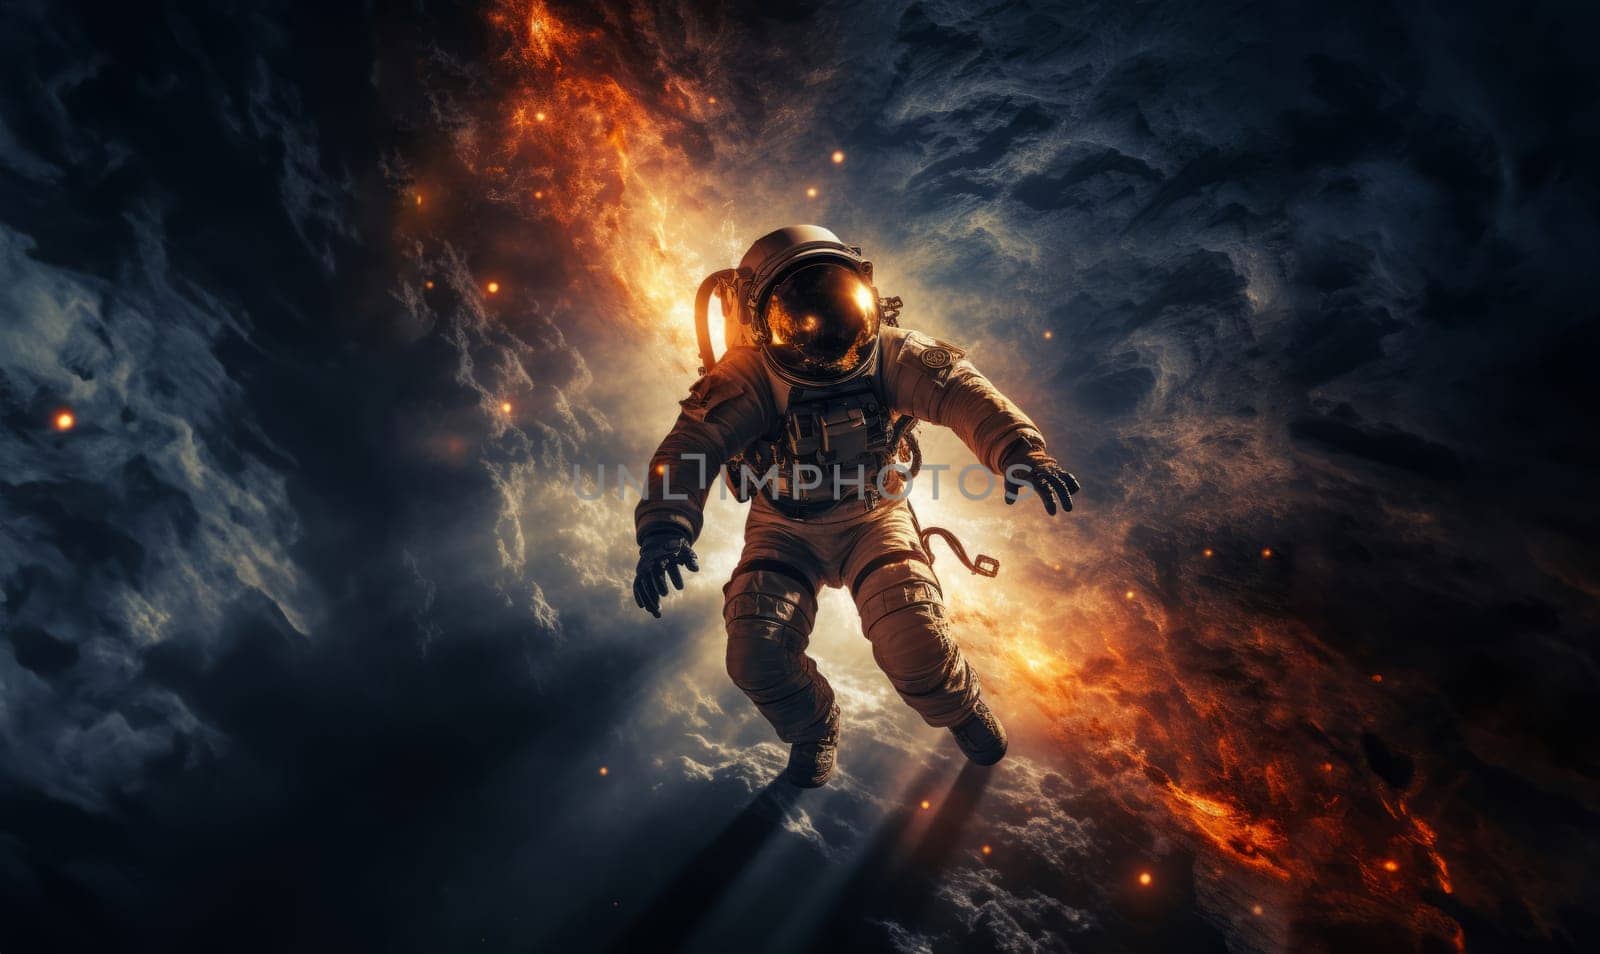 an astronaut and their team exploring mysterious and adventurous locations in space, embarking on a cosmic journey to uncover the wonders and mysteries of the universe.Generated image by dotshock